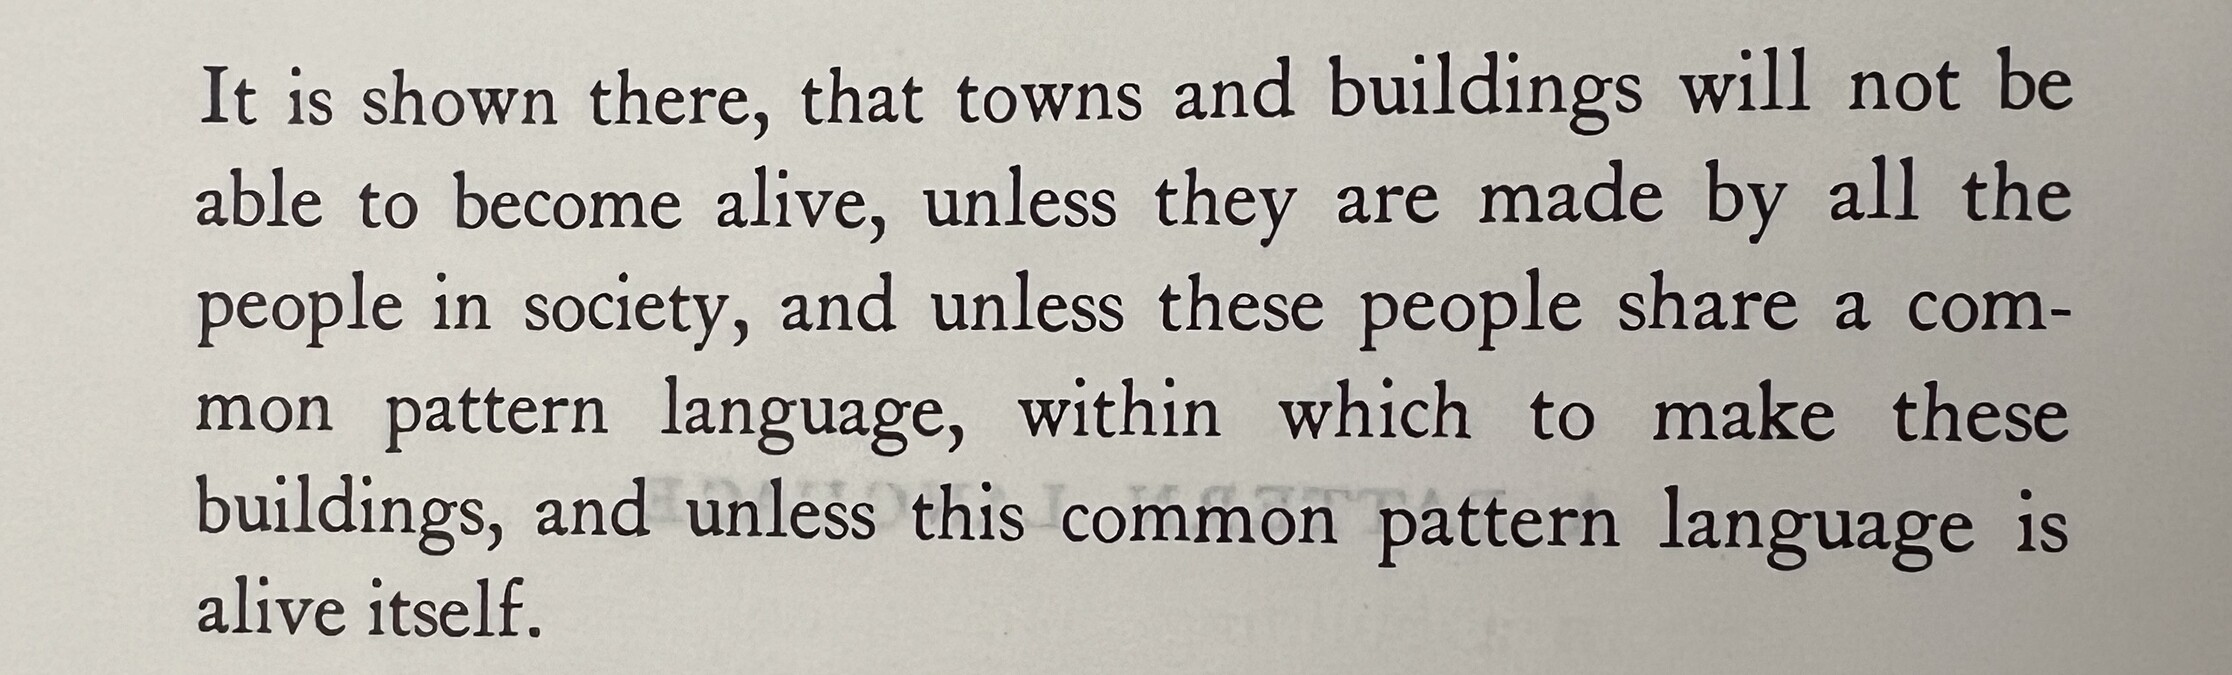 Quote: It is shown there, that towns and buildings will not be able to become alive, unless they are made by all the people in society, and unless these people share a common pattern language, within which to make these buildings, and unless this common pattern language is alive itself